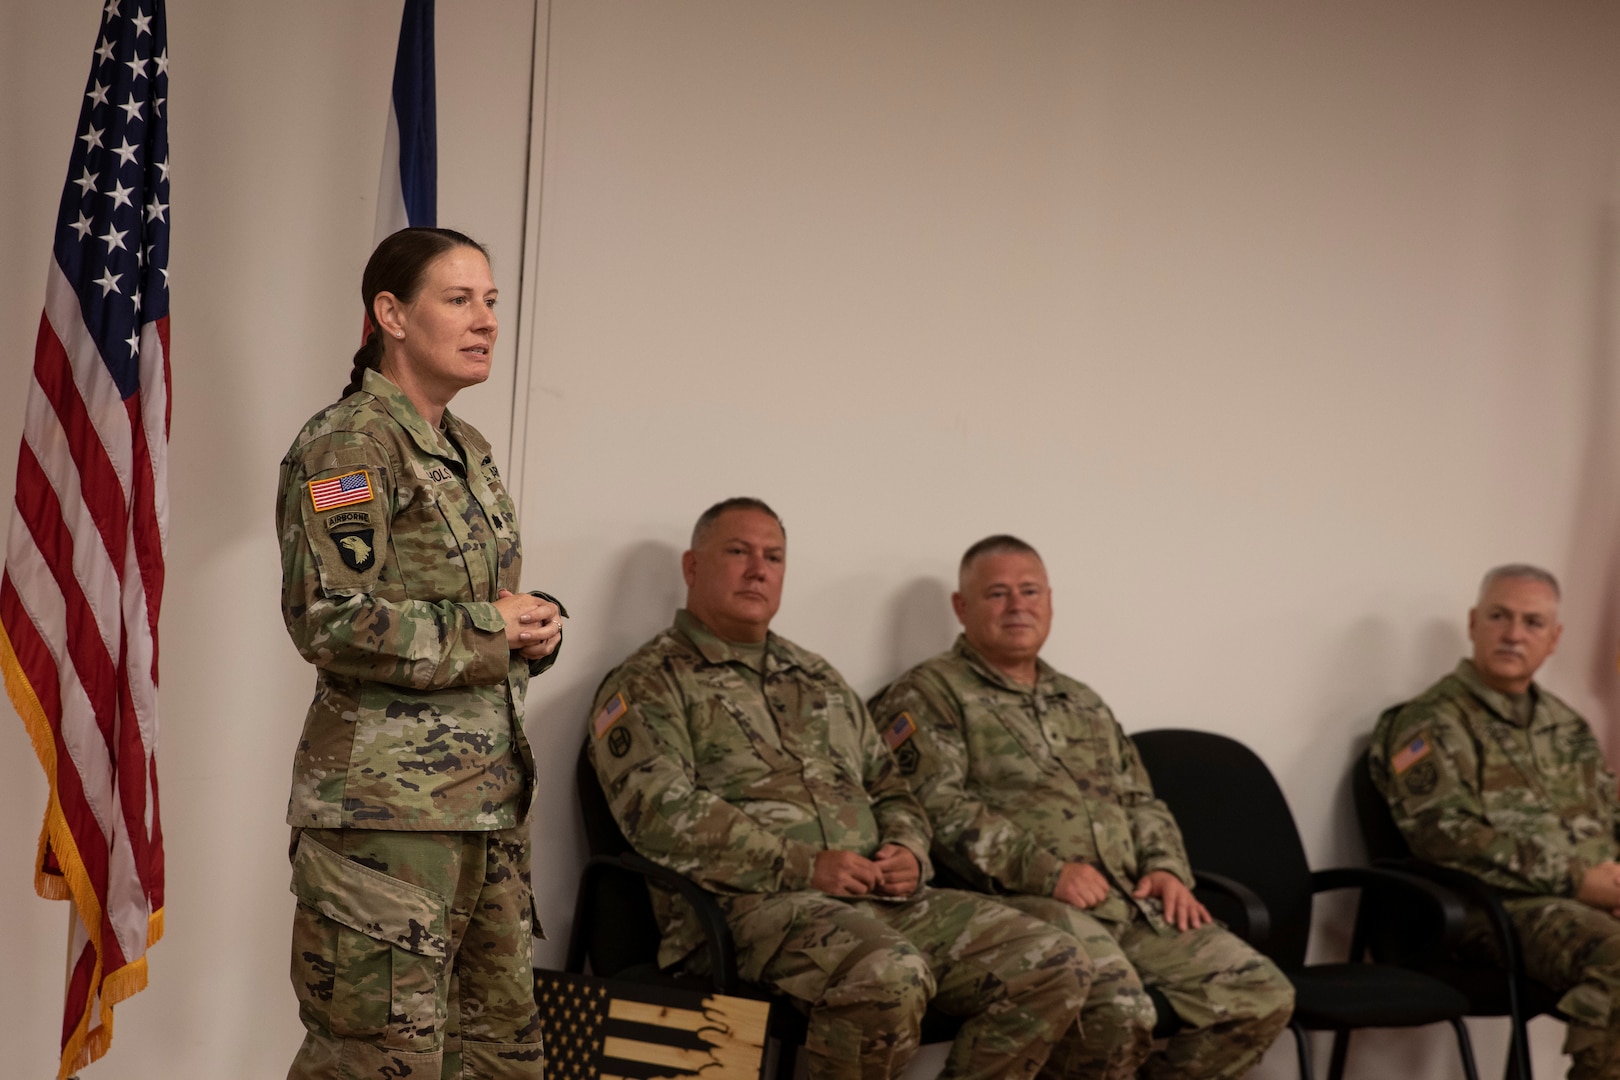 West Virginia Army National Guard Lt. Col. Gina M. Nichols gives remarks following a change of command ceremony at AITEC headquarters in St. Albans, West Virginia, Aug. 9, 2022. Col. Mark B. Houck relinquished command of the Army Interagency Training and Education Center (AITEC) to Nichols during the ceremony.